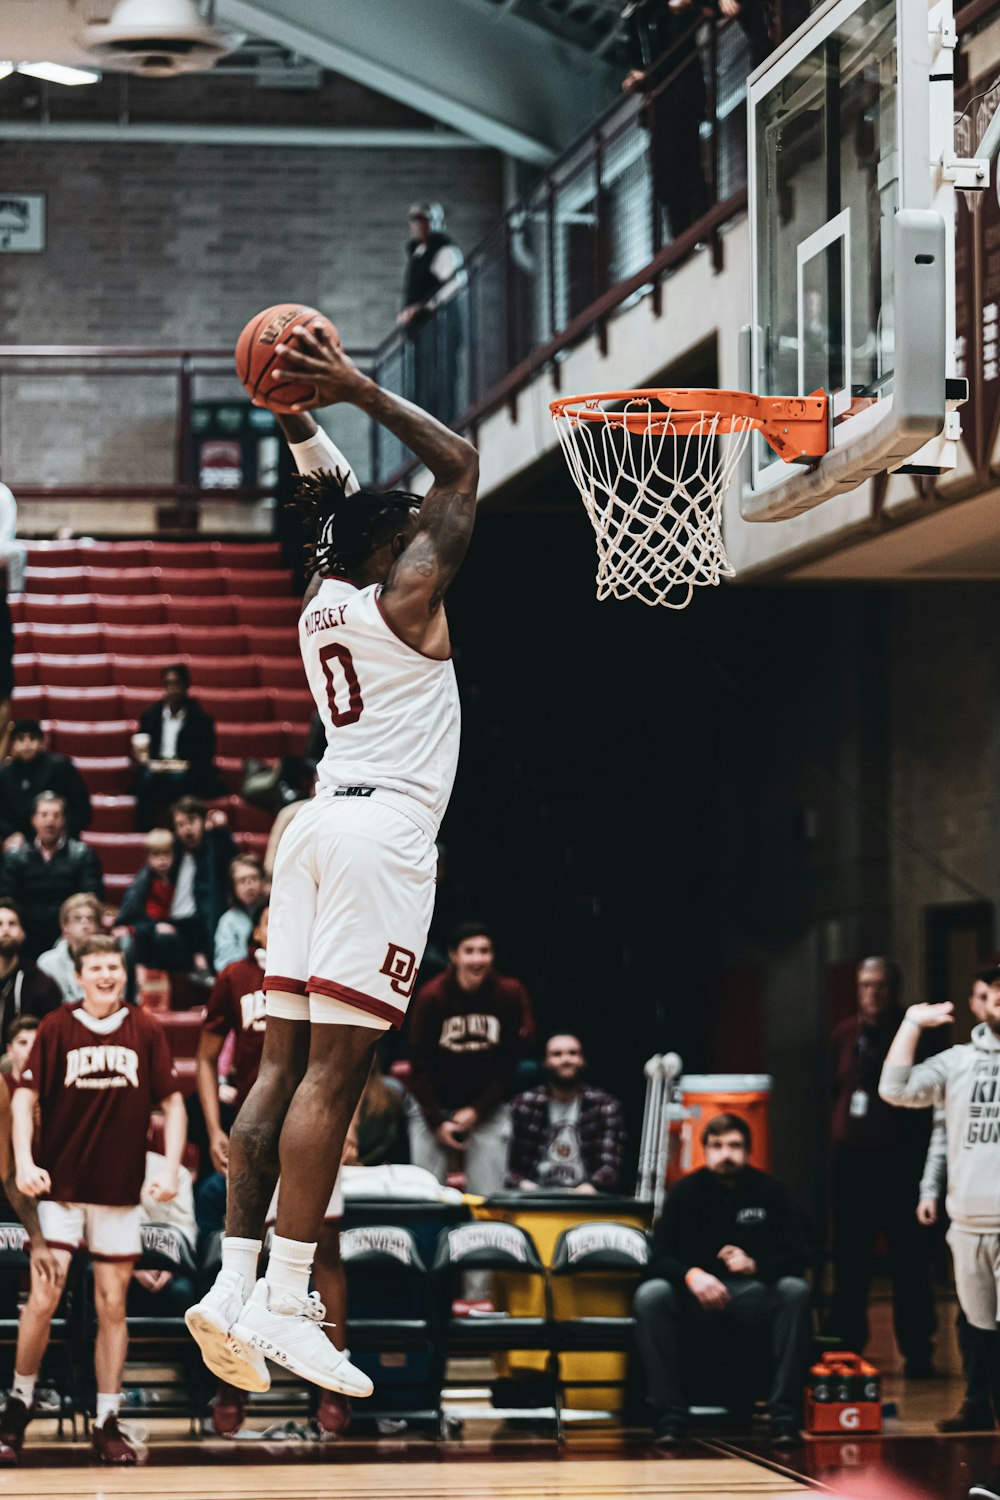 Basketball Dunk Pictures | Download Free Images on Unsplash